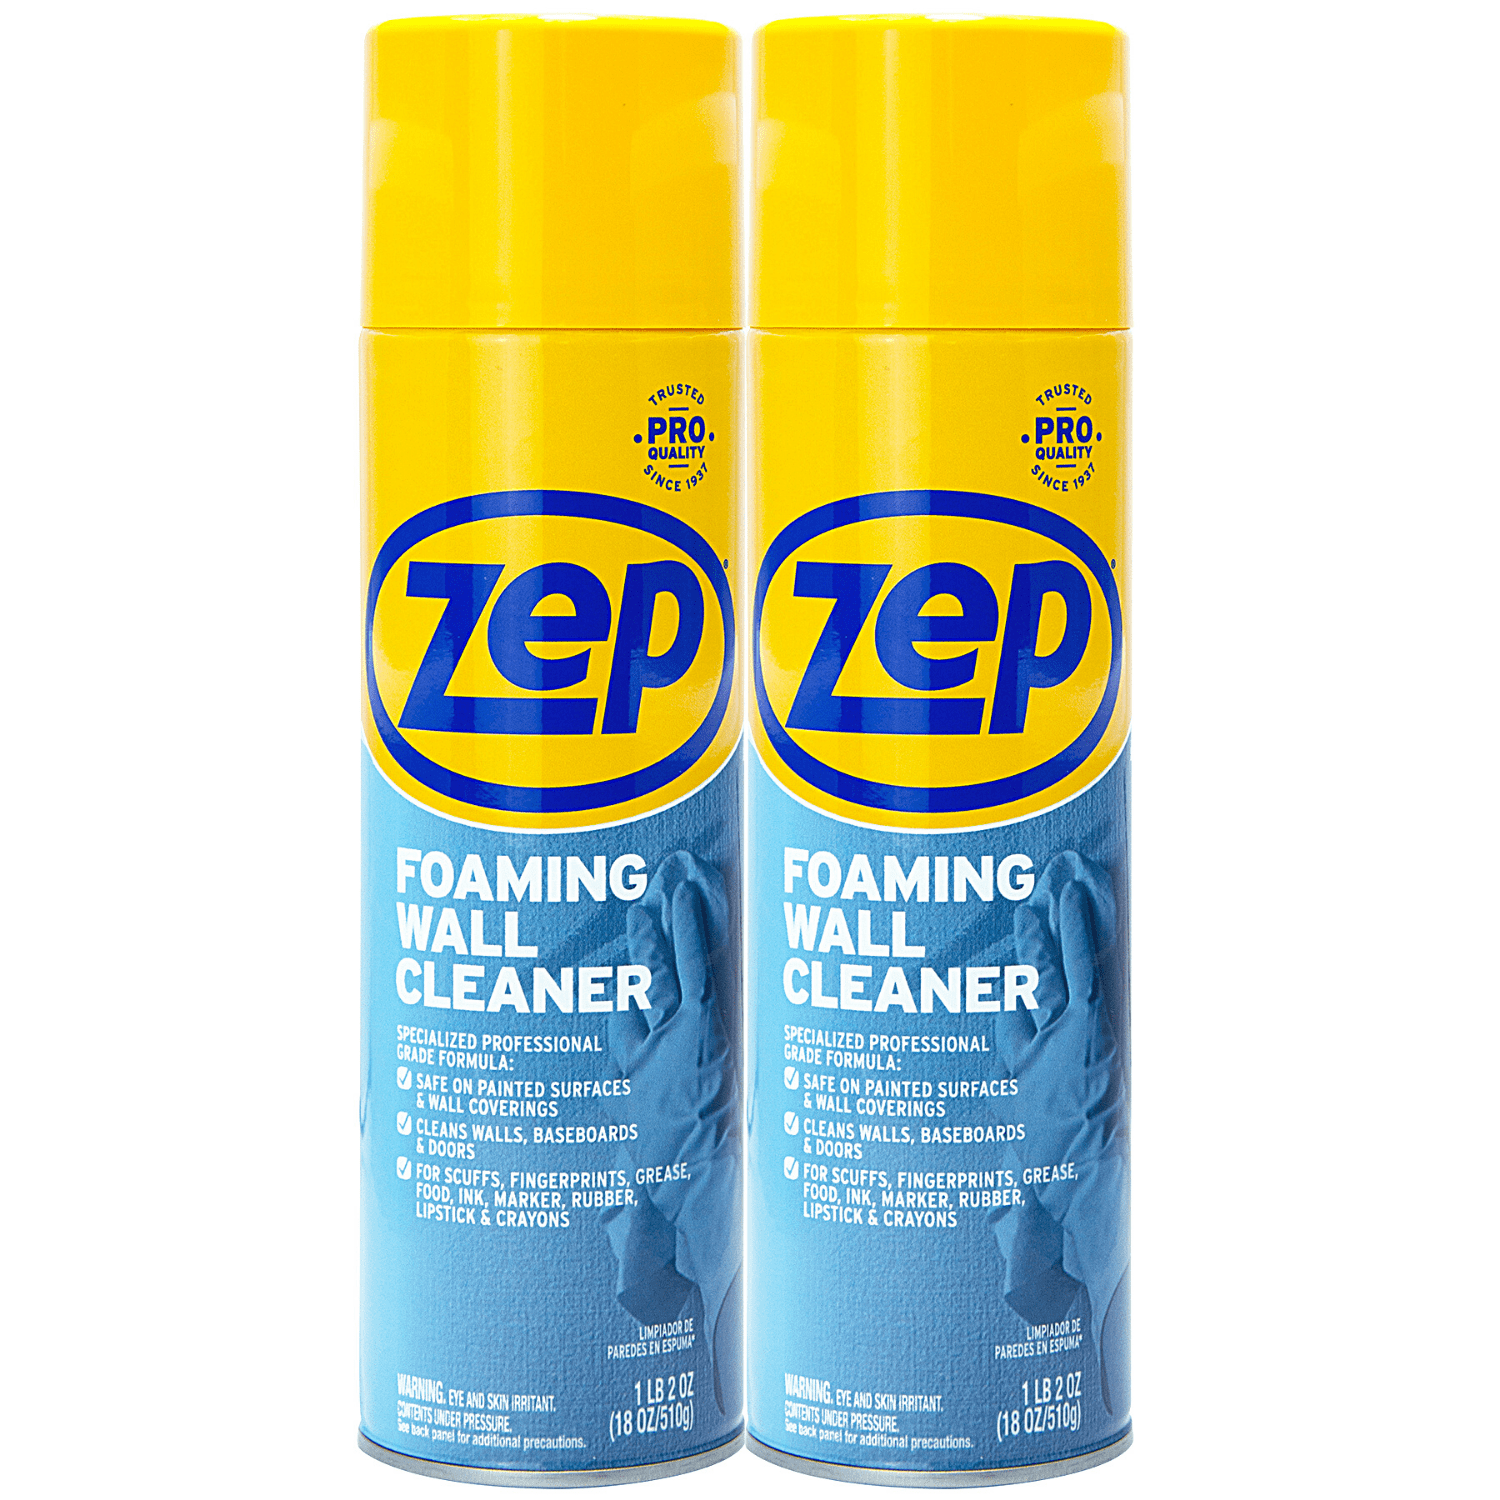 Zep Foaming Wall Cleaner - 18 oz (Case of 4) - ZUFWC184 - Removes Stains  Without Damaging Finishes